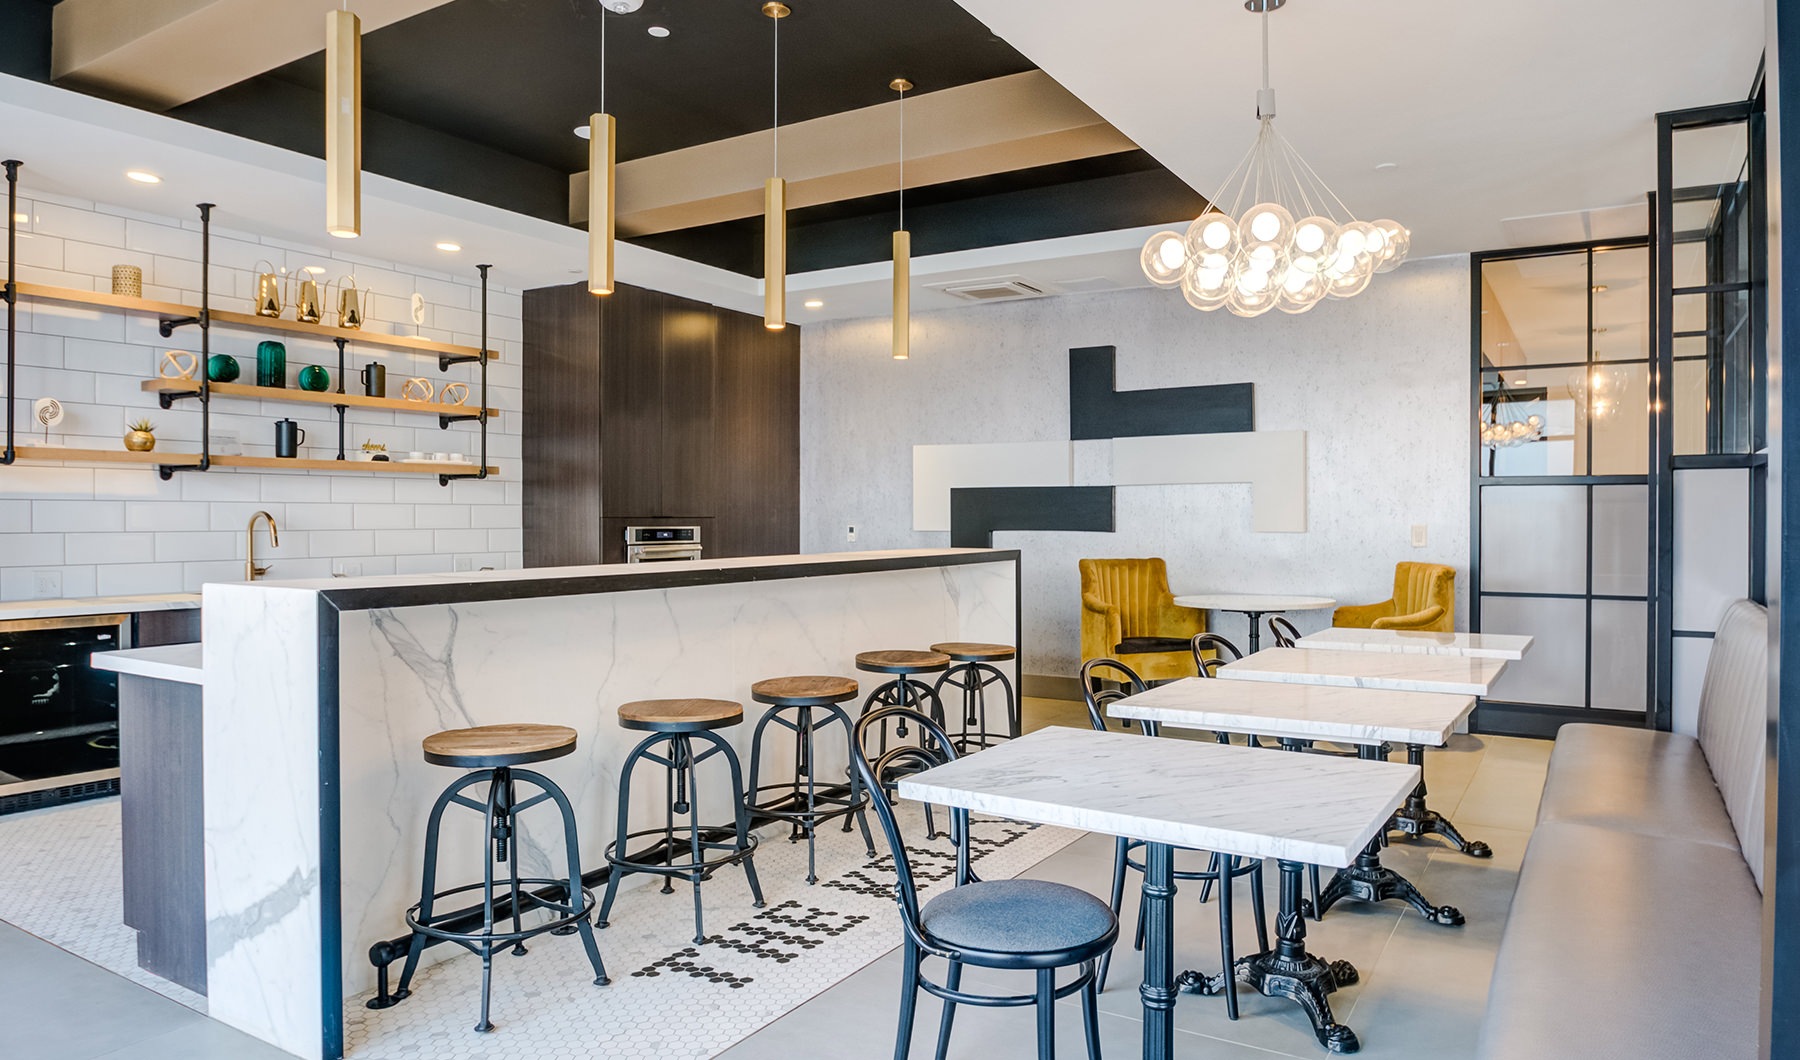 Large well lit community kitchen with cafe style seating